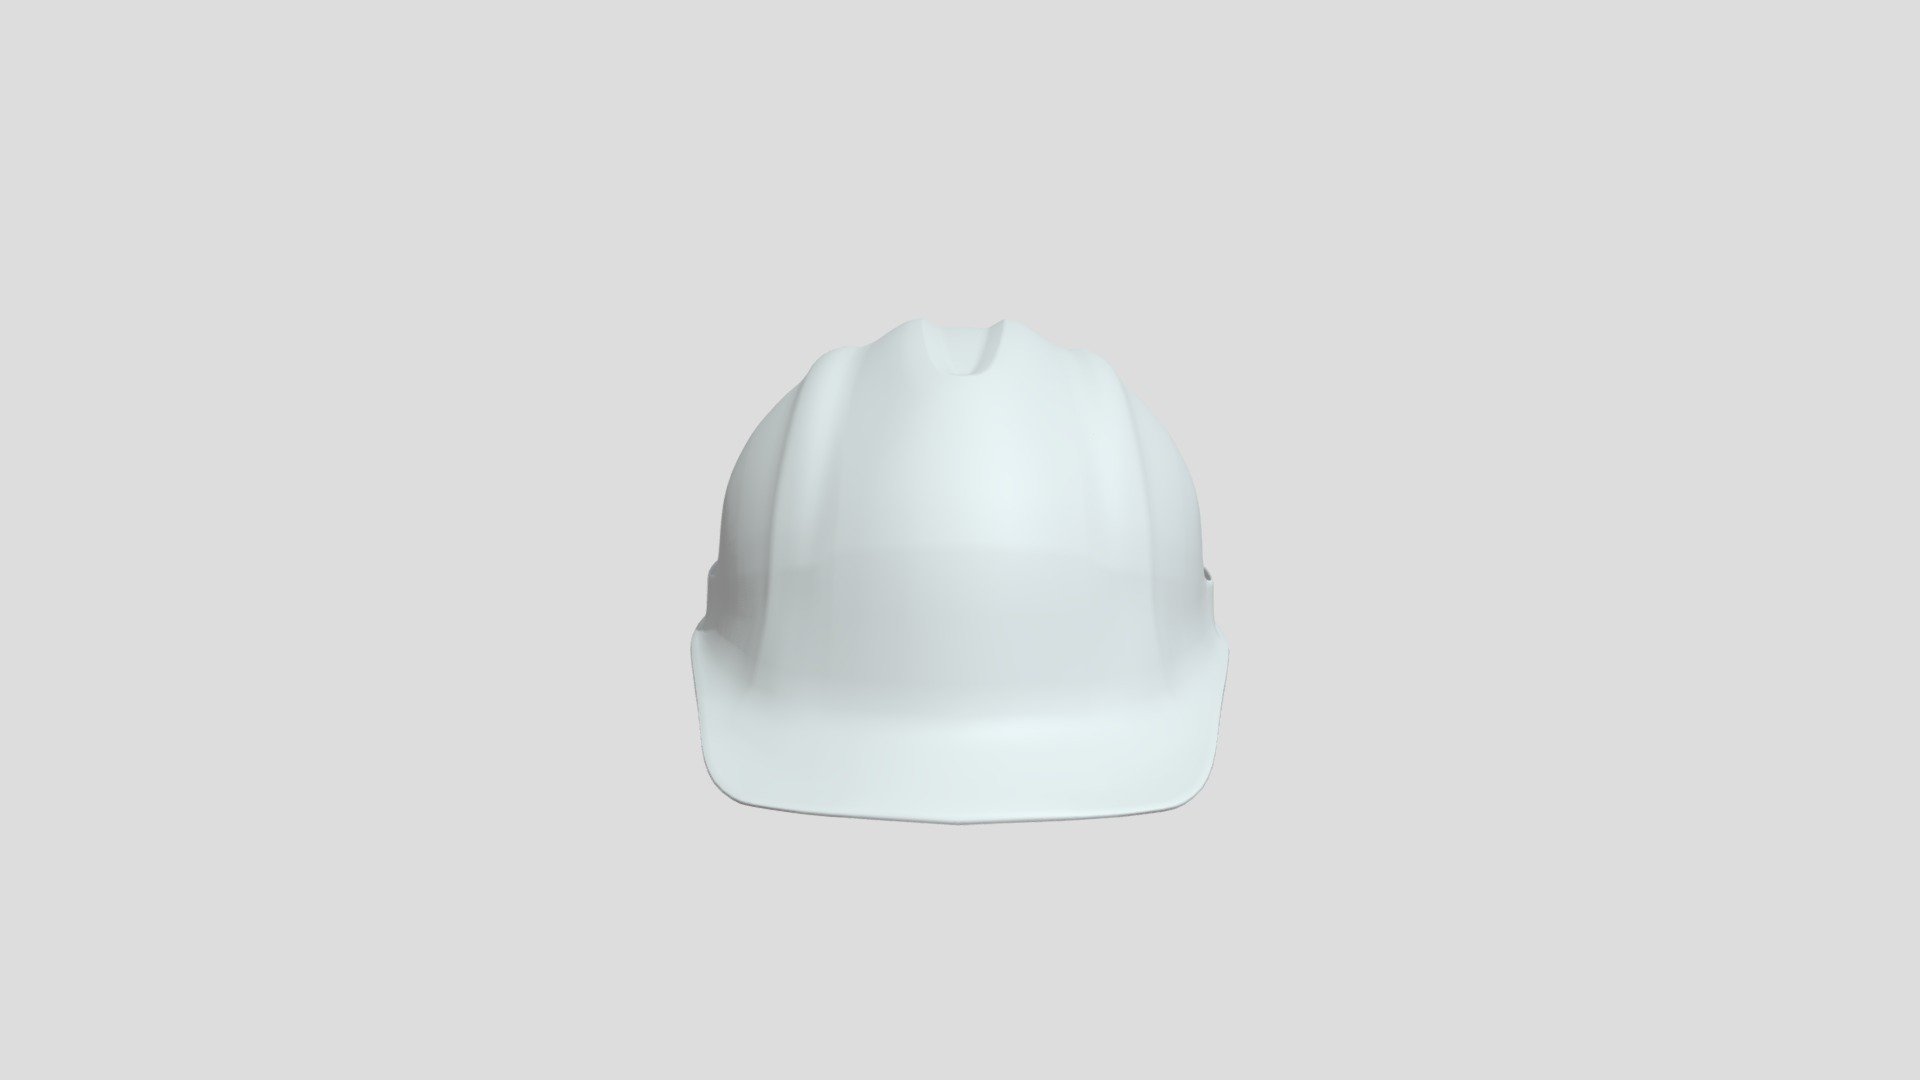 This is a construction hard hat i made while at vfs, the head ban, back strap &amp; gear are all seperate objects. Comes UV unwrapped :) - Hard Hat Construction - 3D model by nate yahnke (@nateyahnke) 3d model